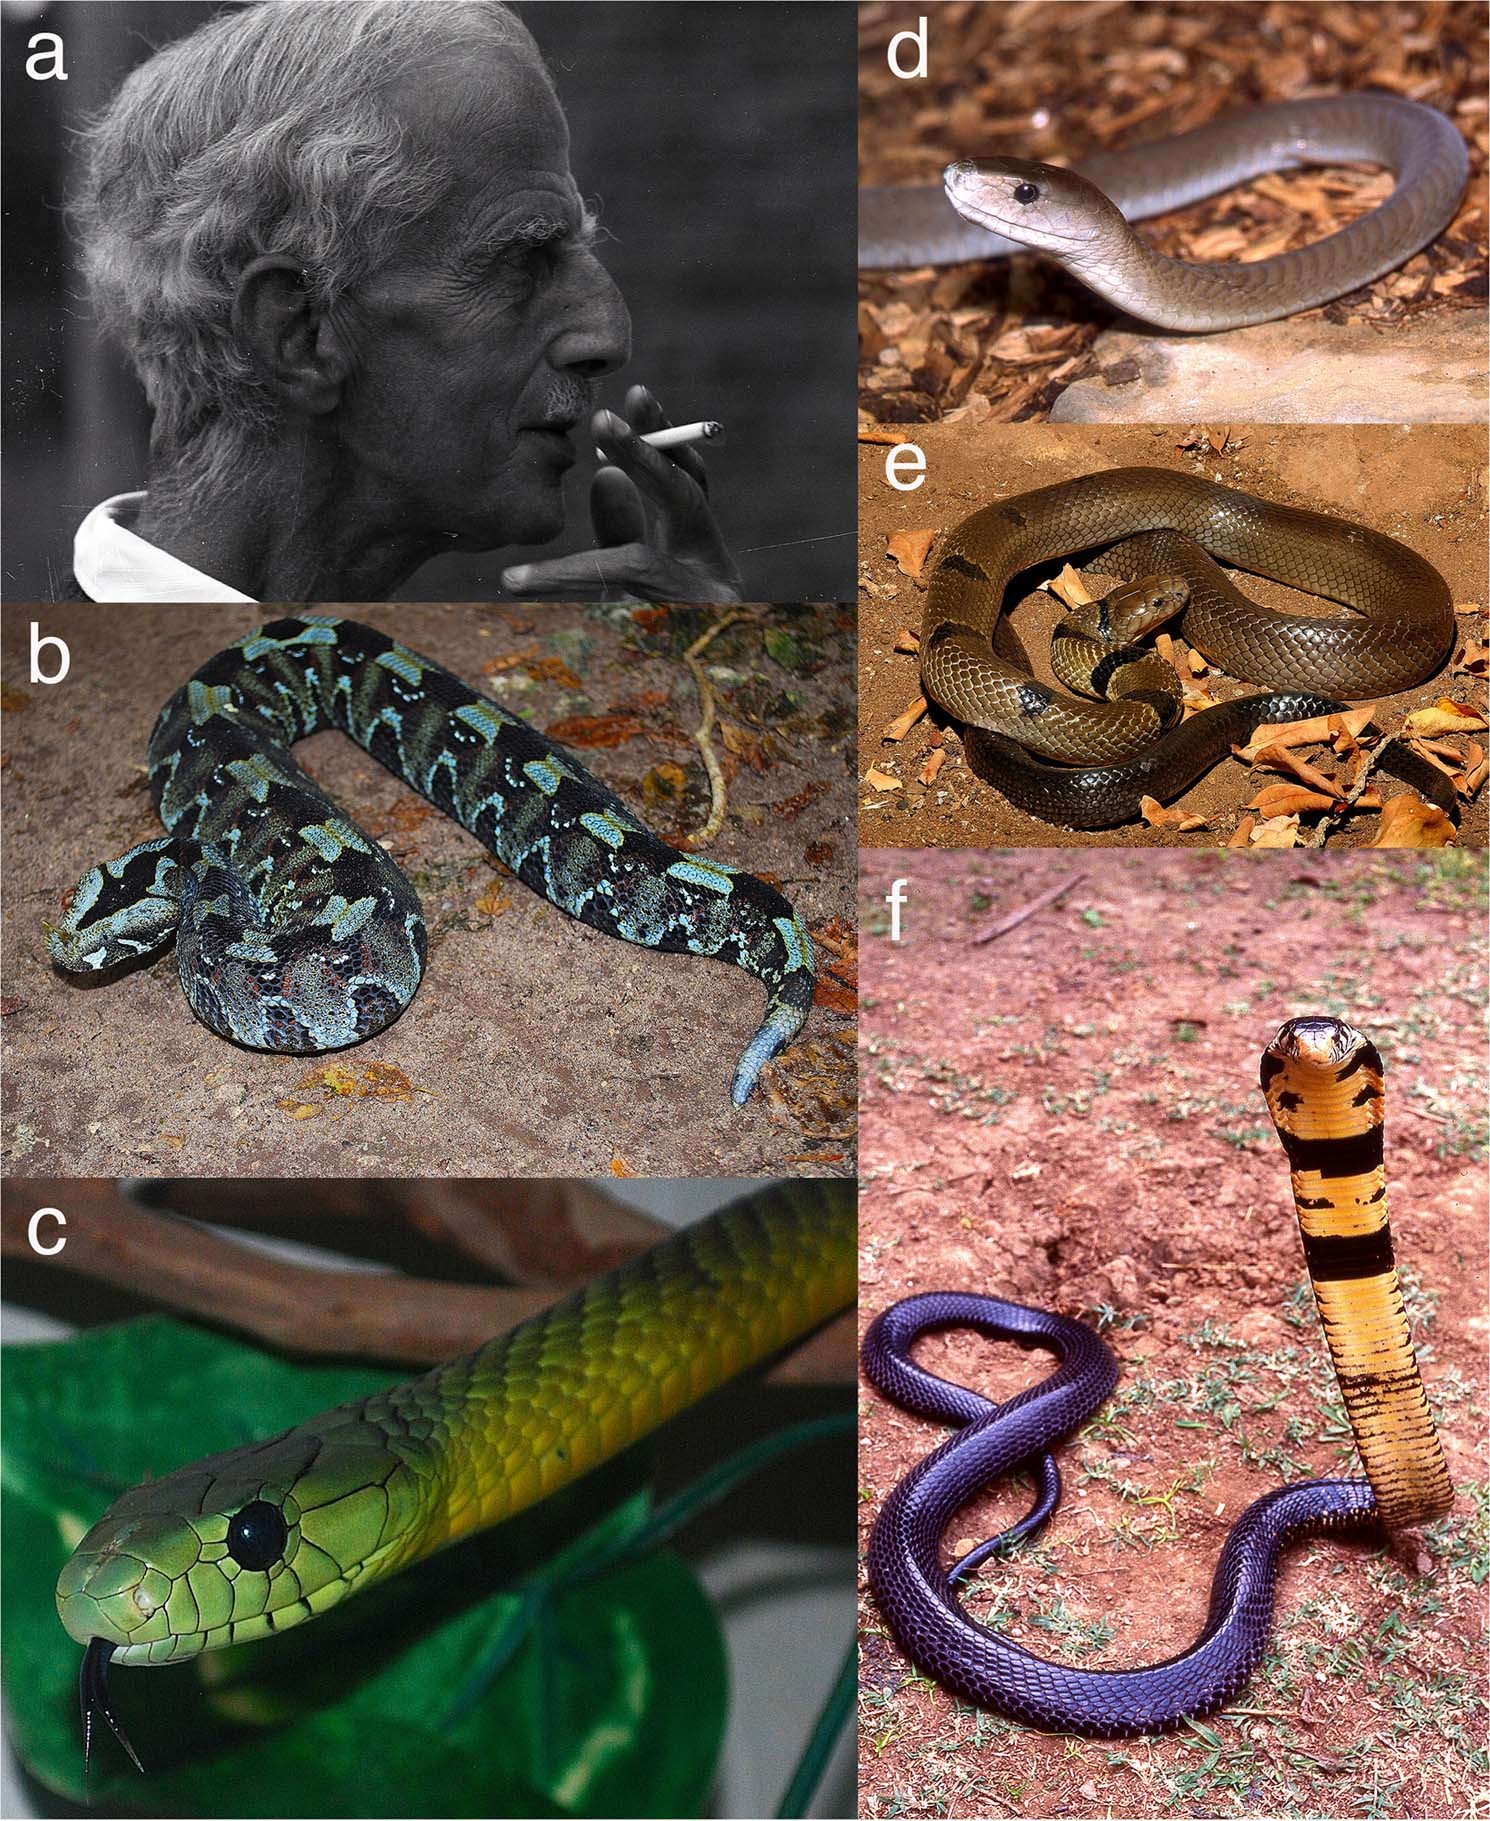 An ecological analysis of snakes captured by . Ionides in eastern  Africa in the mid-1900s | Scientific Reports